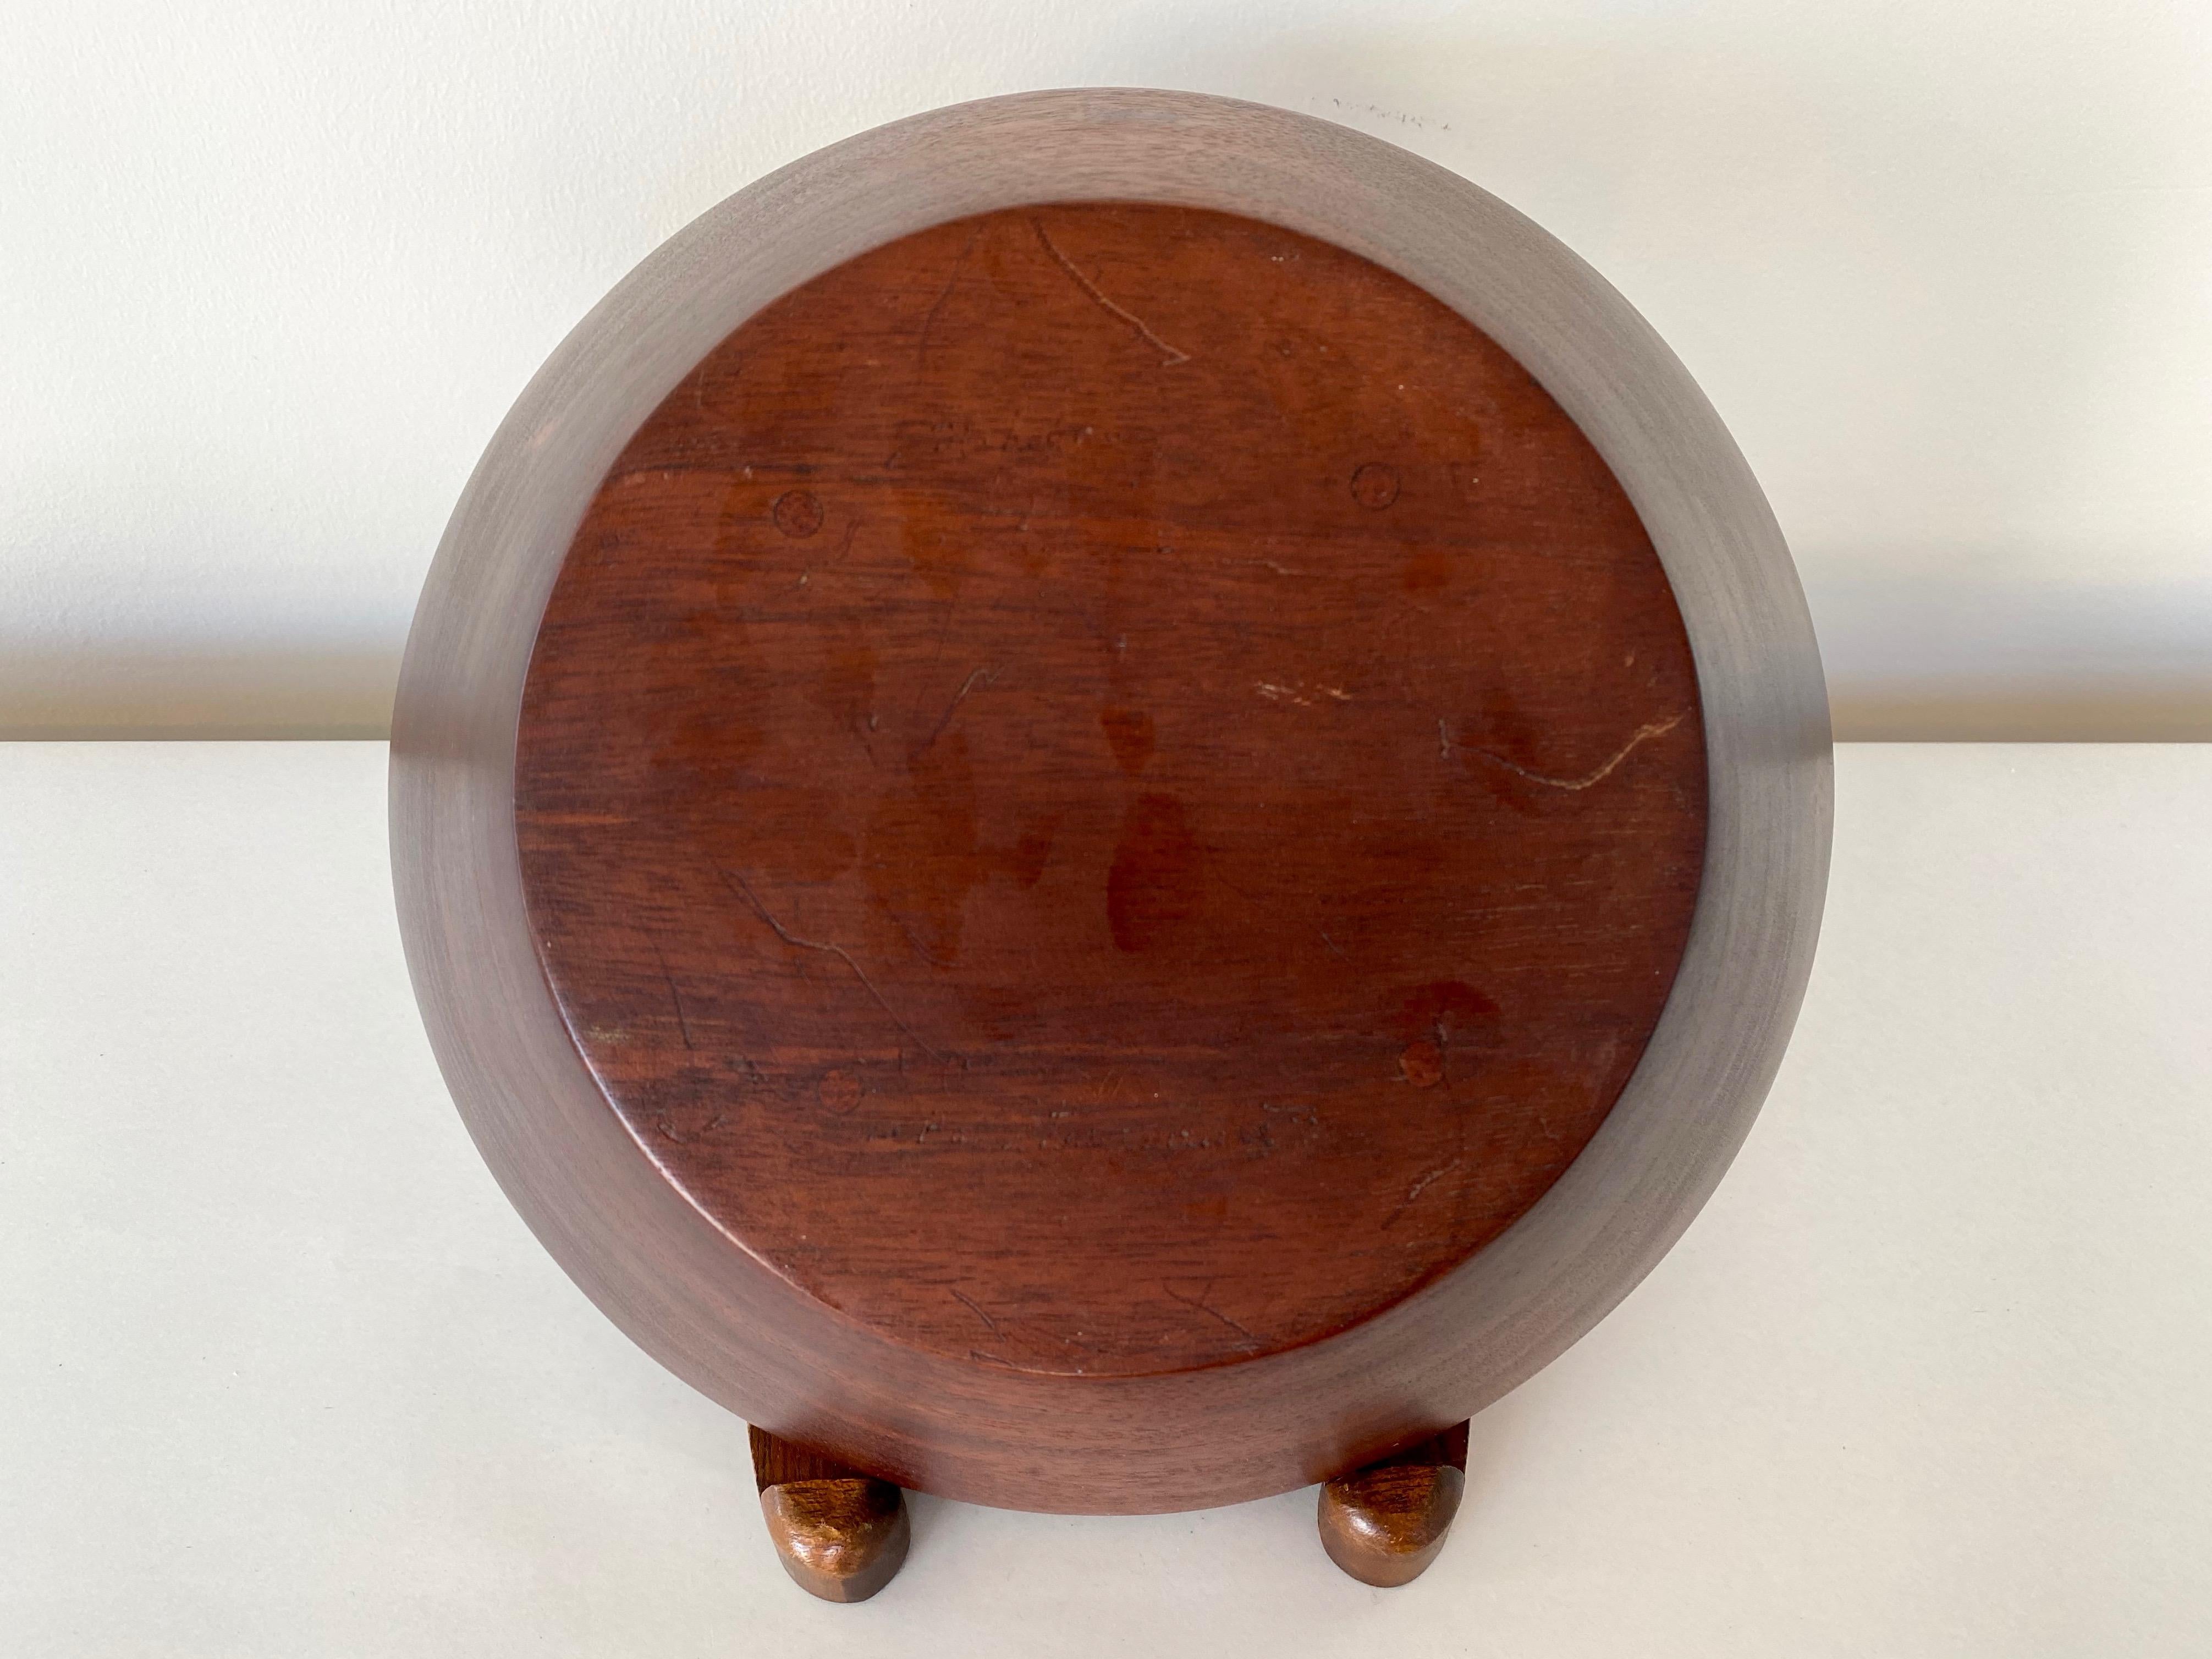 Bob Stocksdale Mahogany Turned Wood Bowl, Signed, 1960s For Sale 11